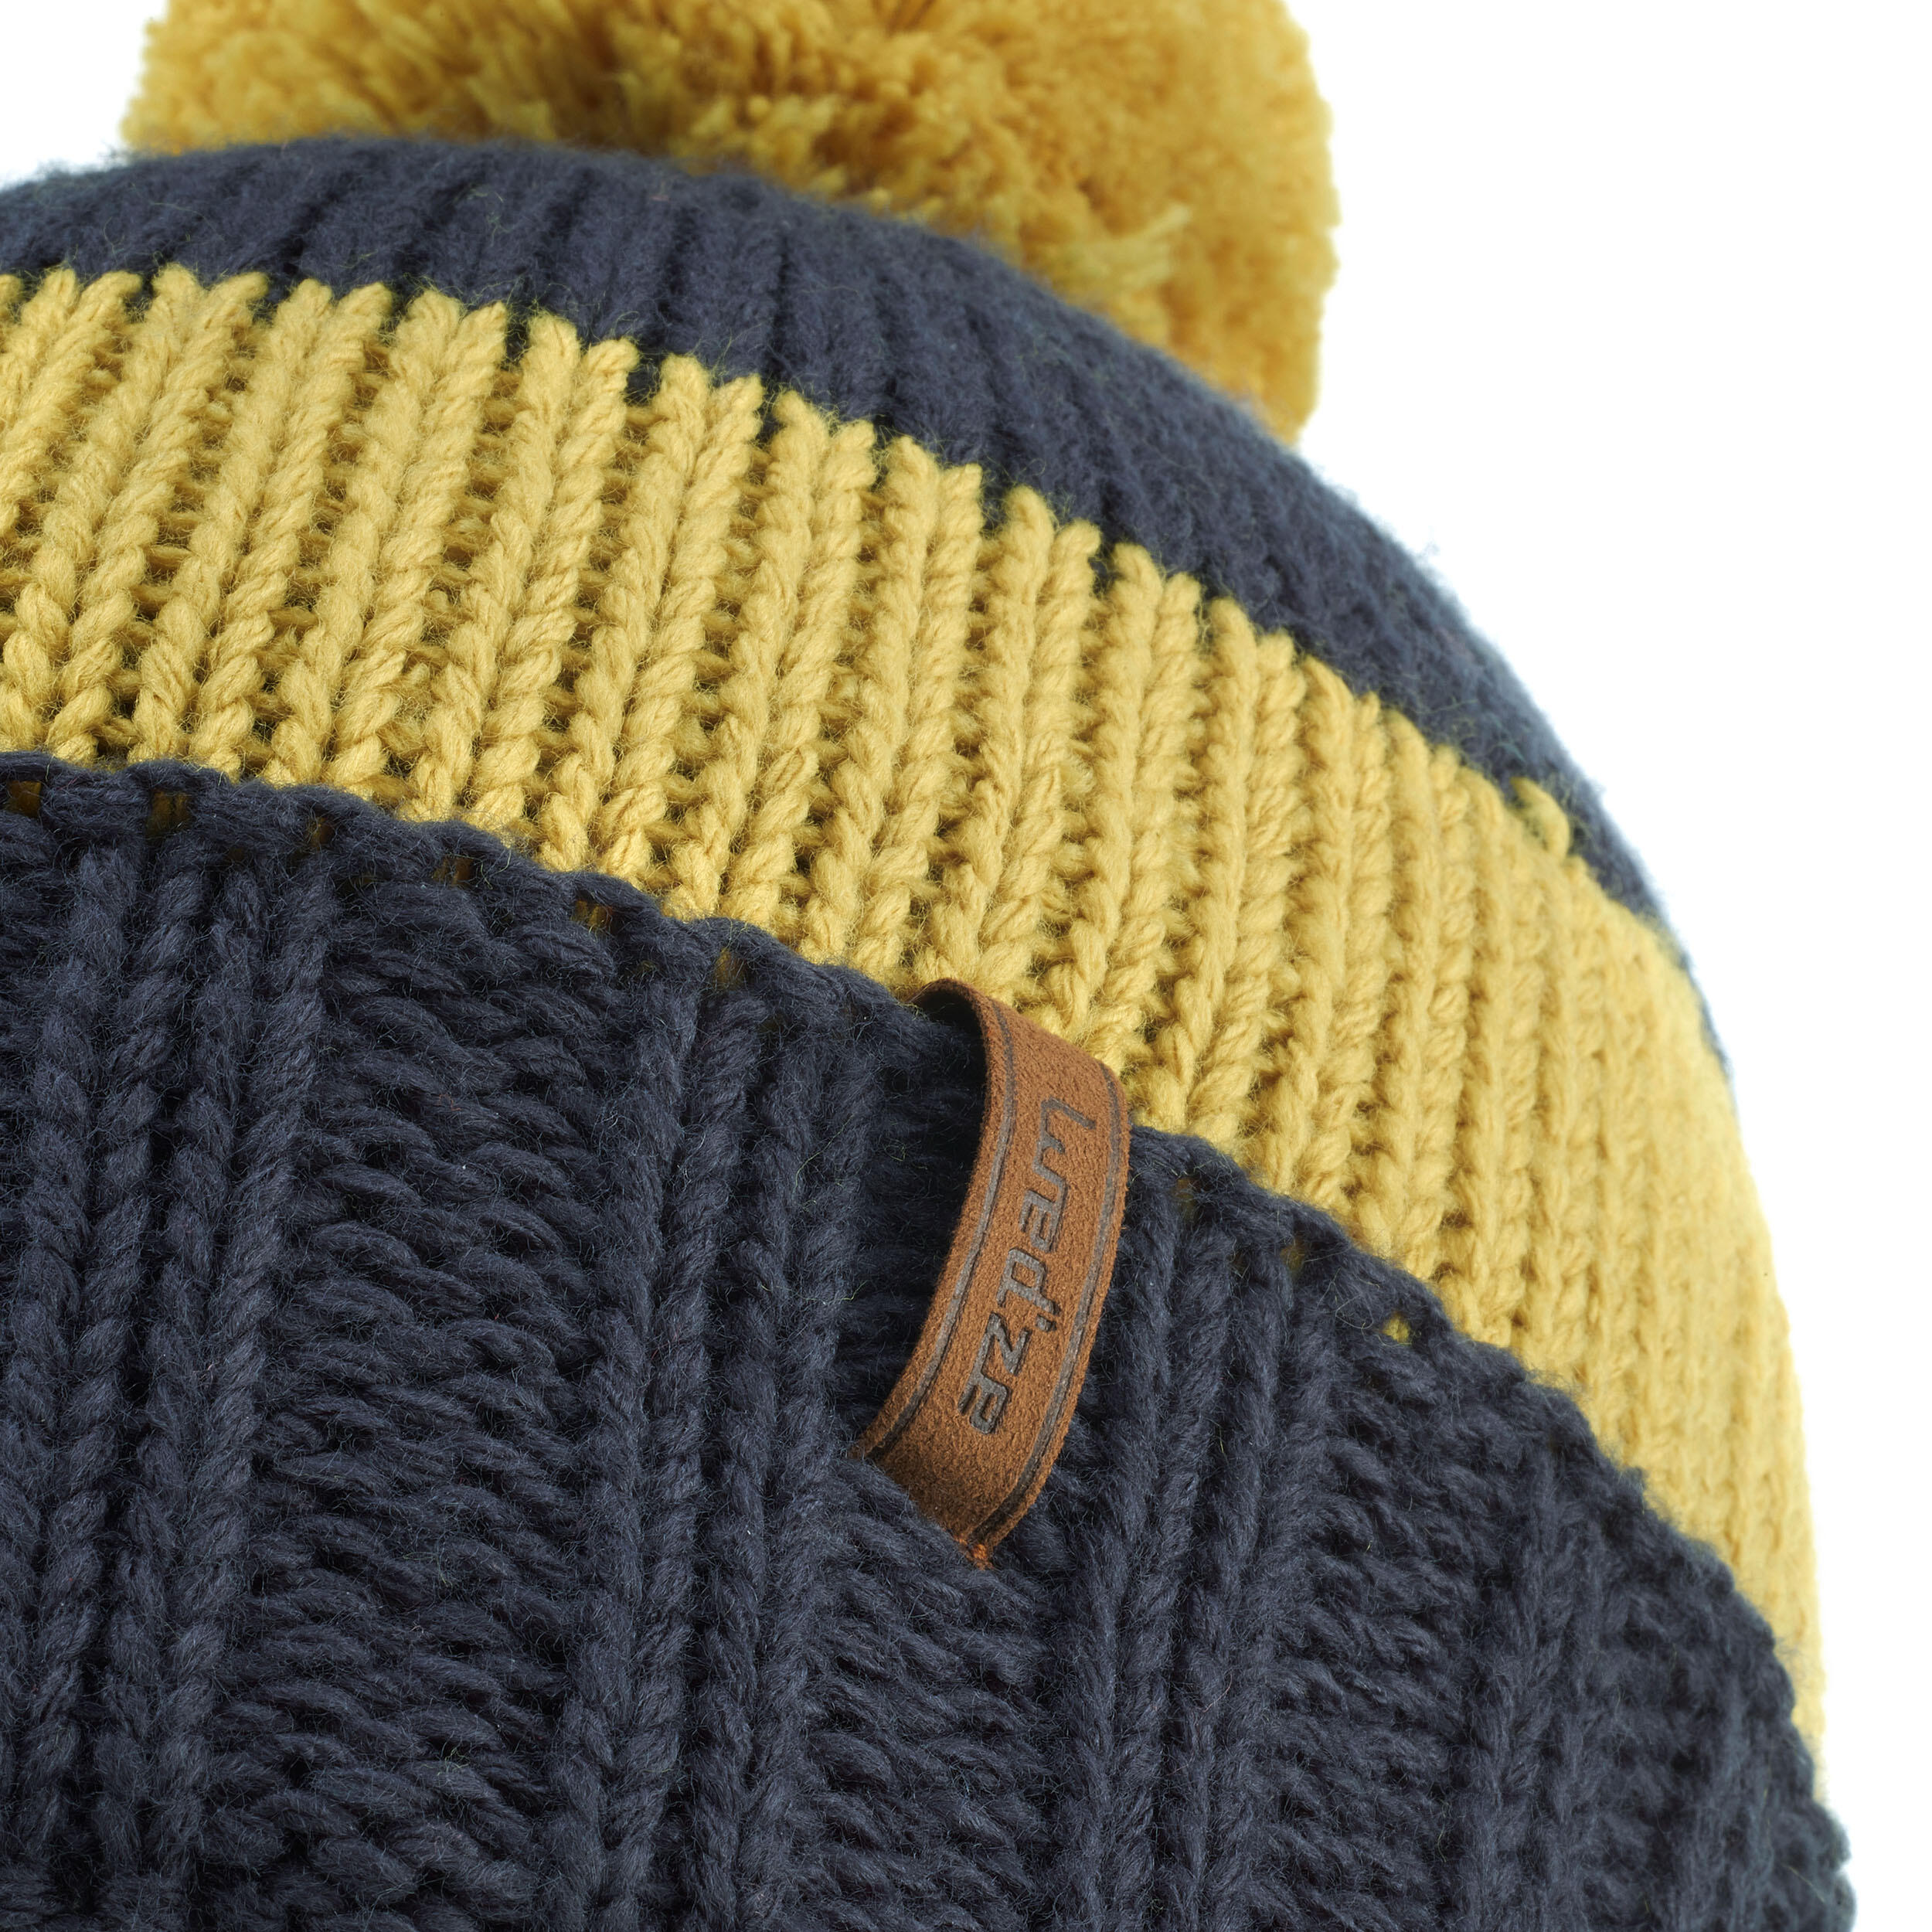 ADULT SKI HAT GRAND NORD MADE IN FRANCE NAVY BLUE-OCHRE 6/8